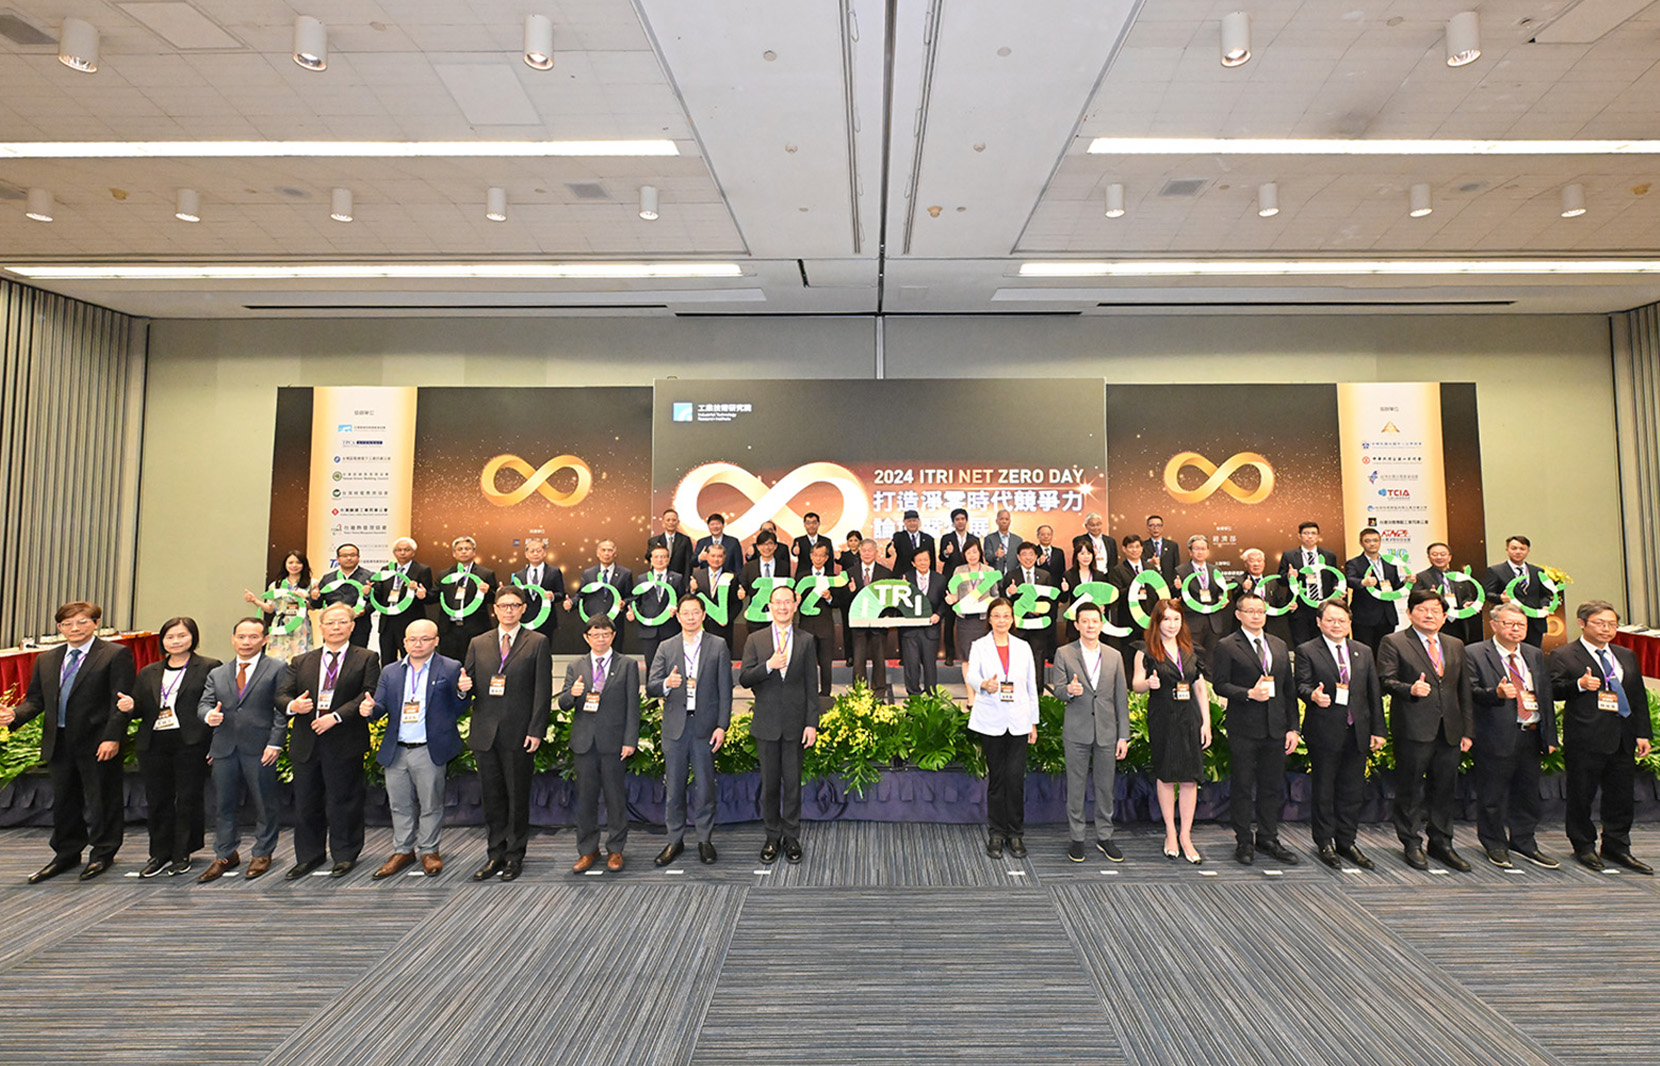 ITRI Net Zero Day 2024 Showcases Hydrogen Innovation and Green Financing Solutions